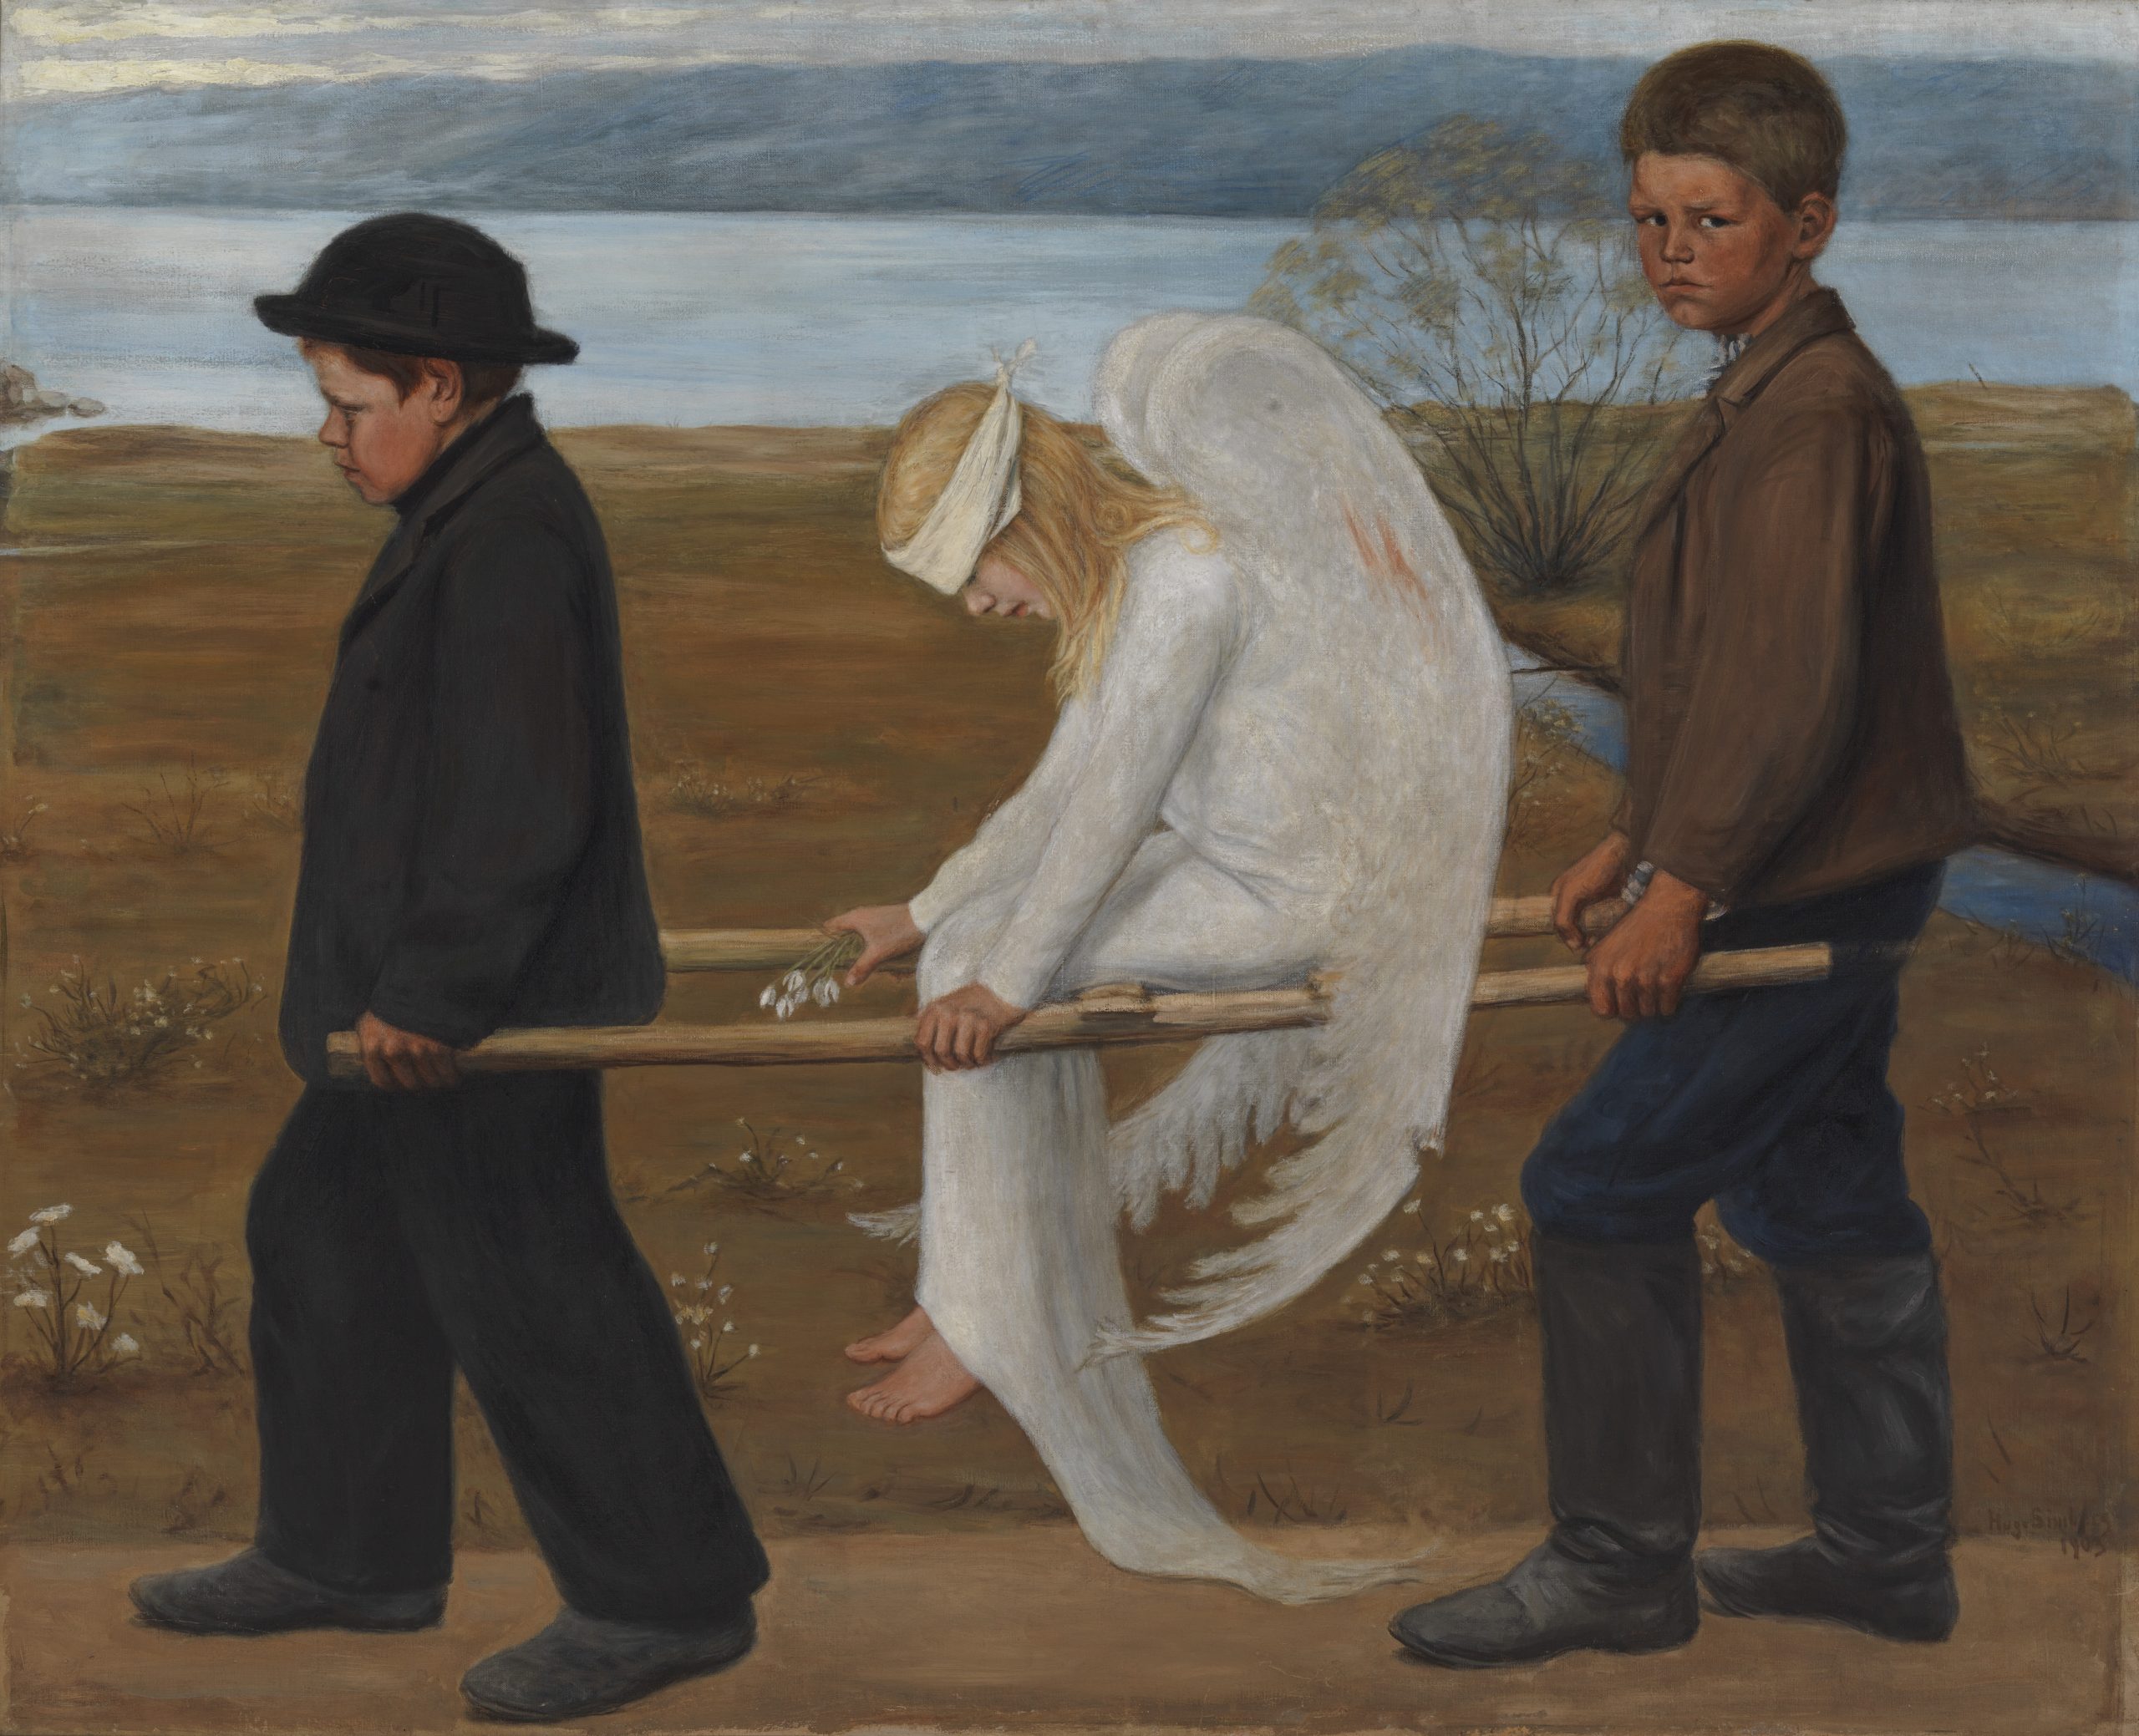 Two boys carry a fallen angel through a pathway next to a river.